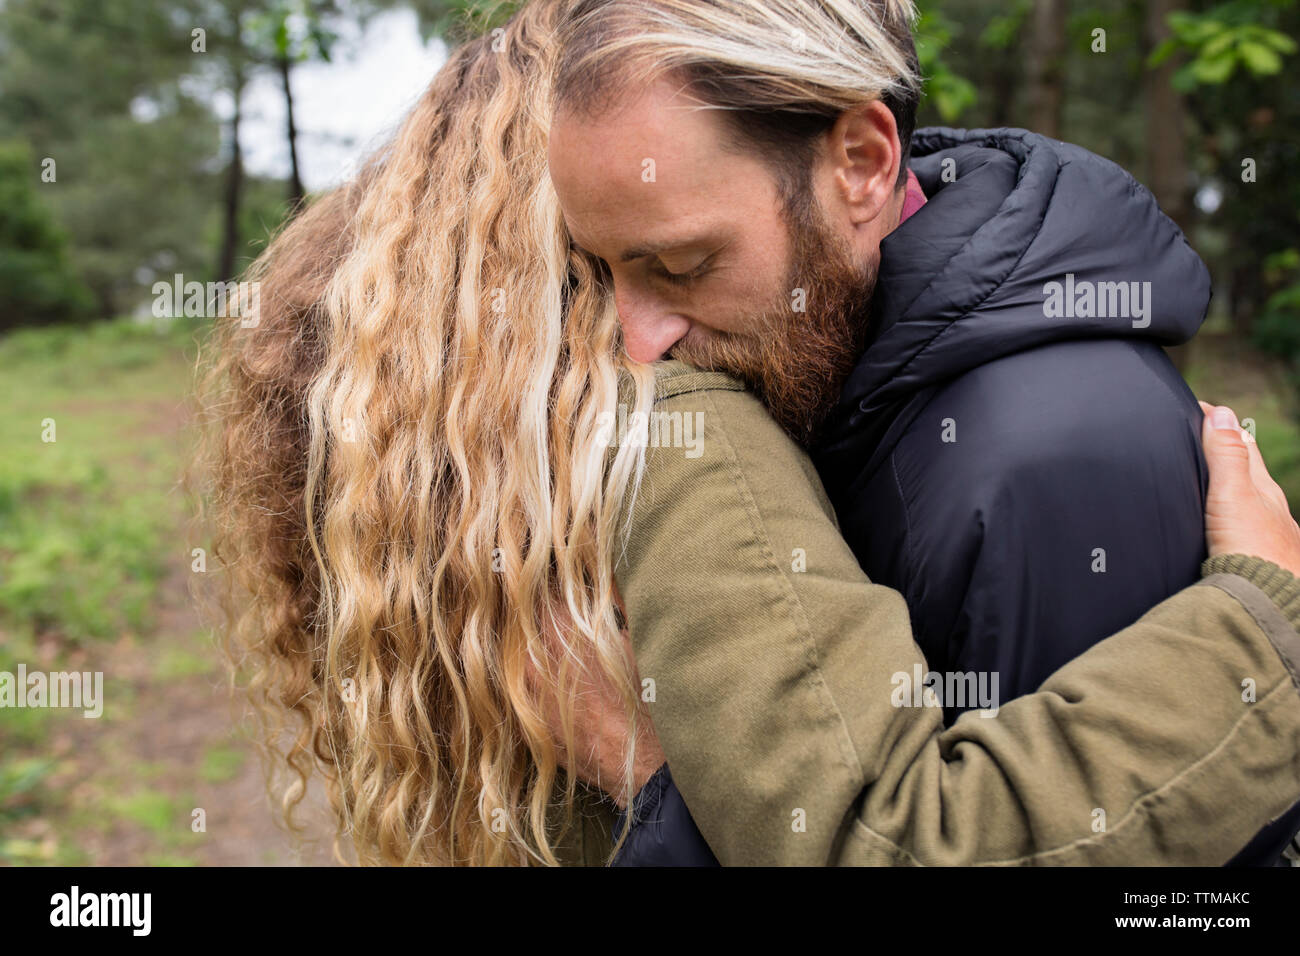 Side view of affectionate couple embracing in forest Stock Photo